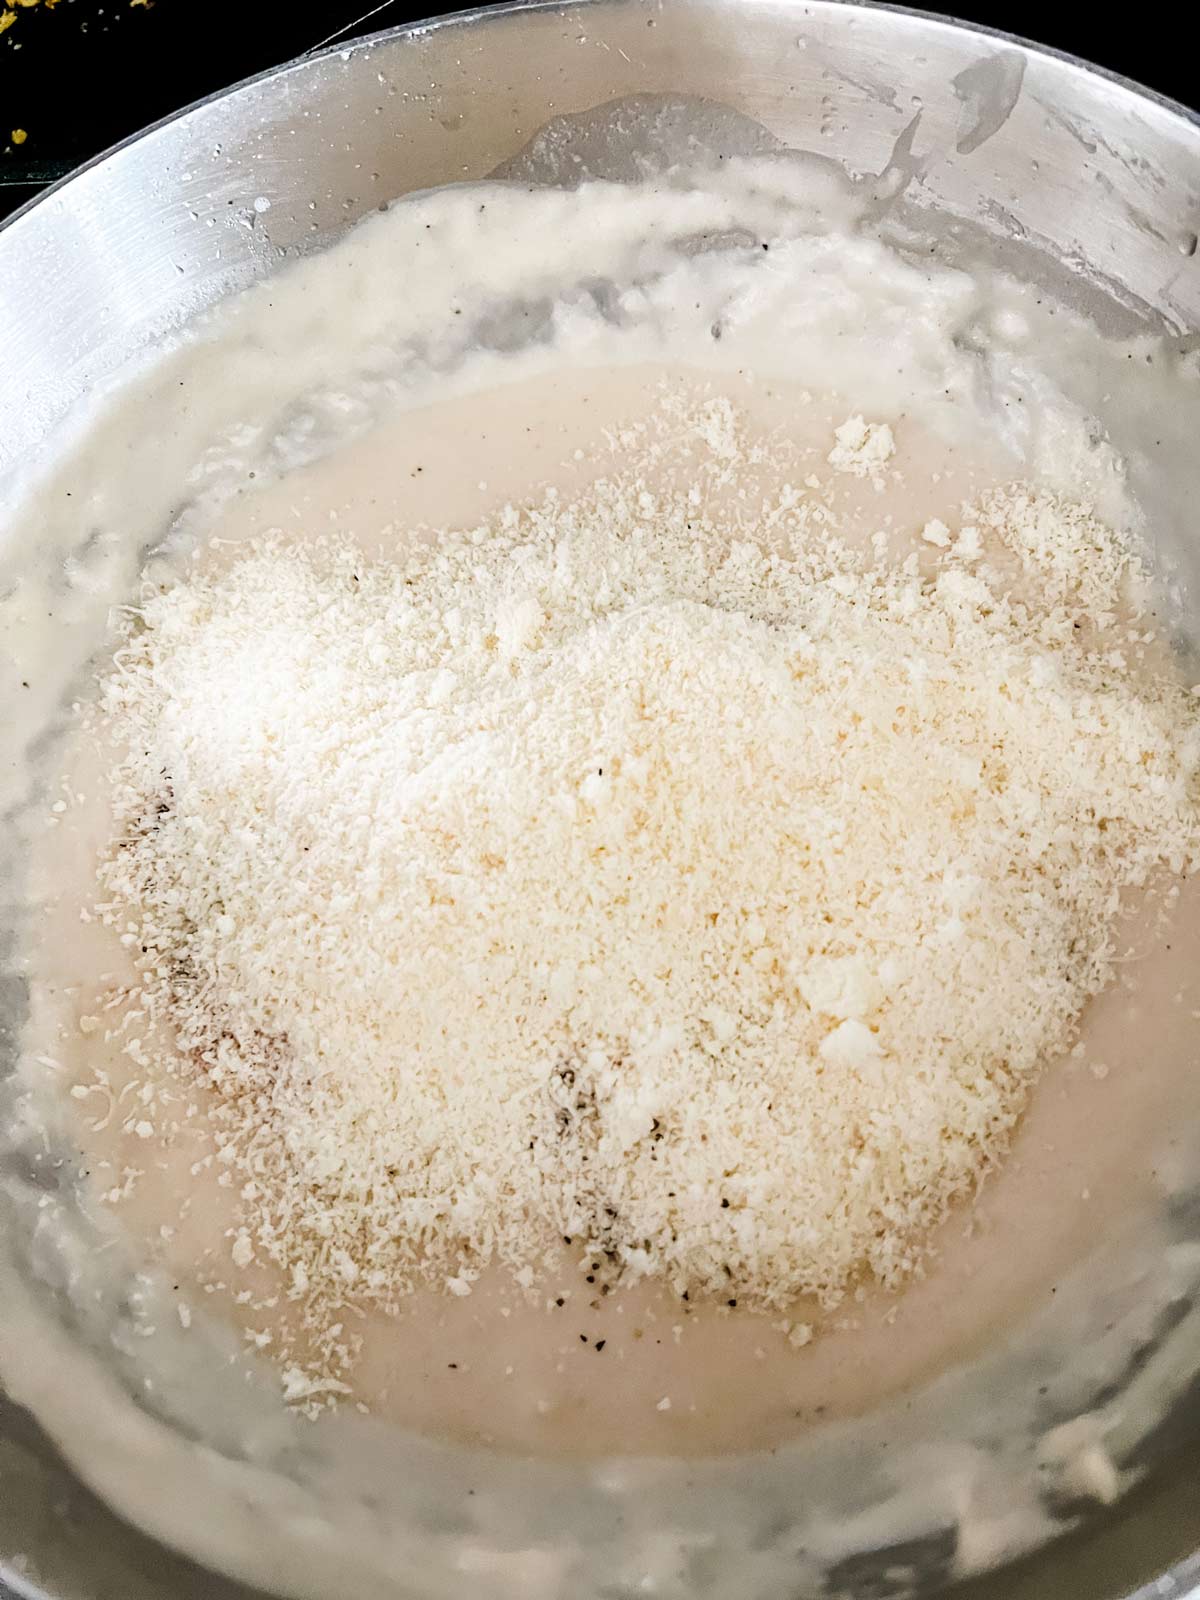 Garlic parmesan sauce that has just had the cheese added.